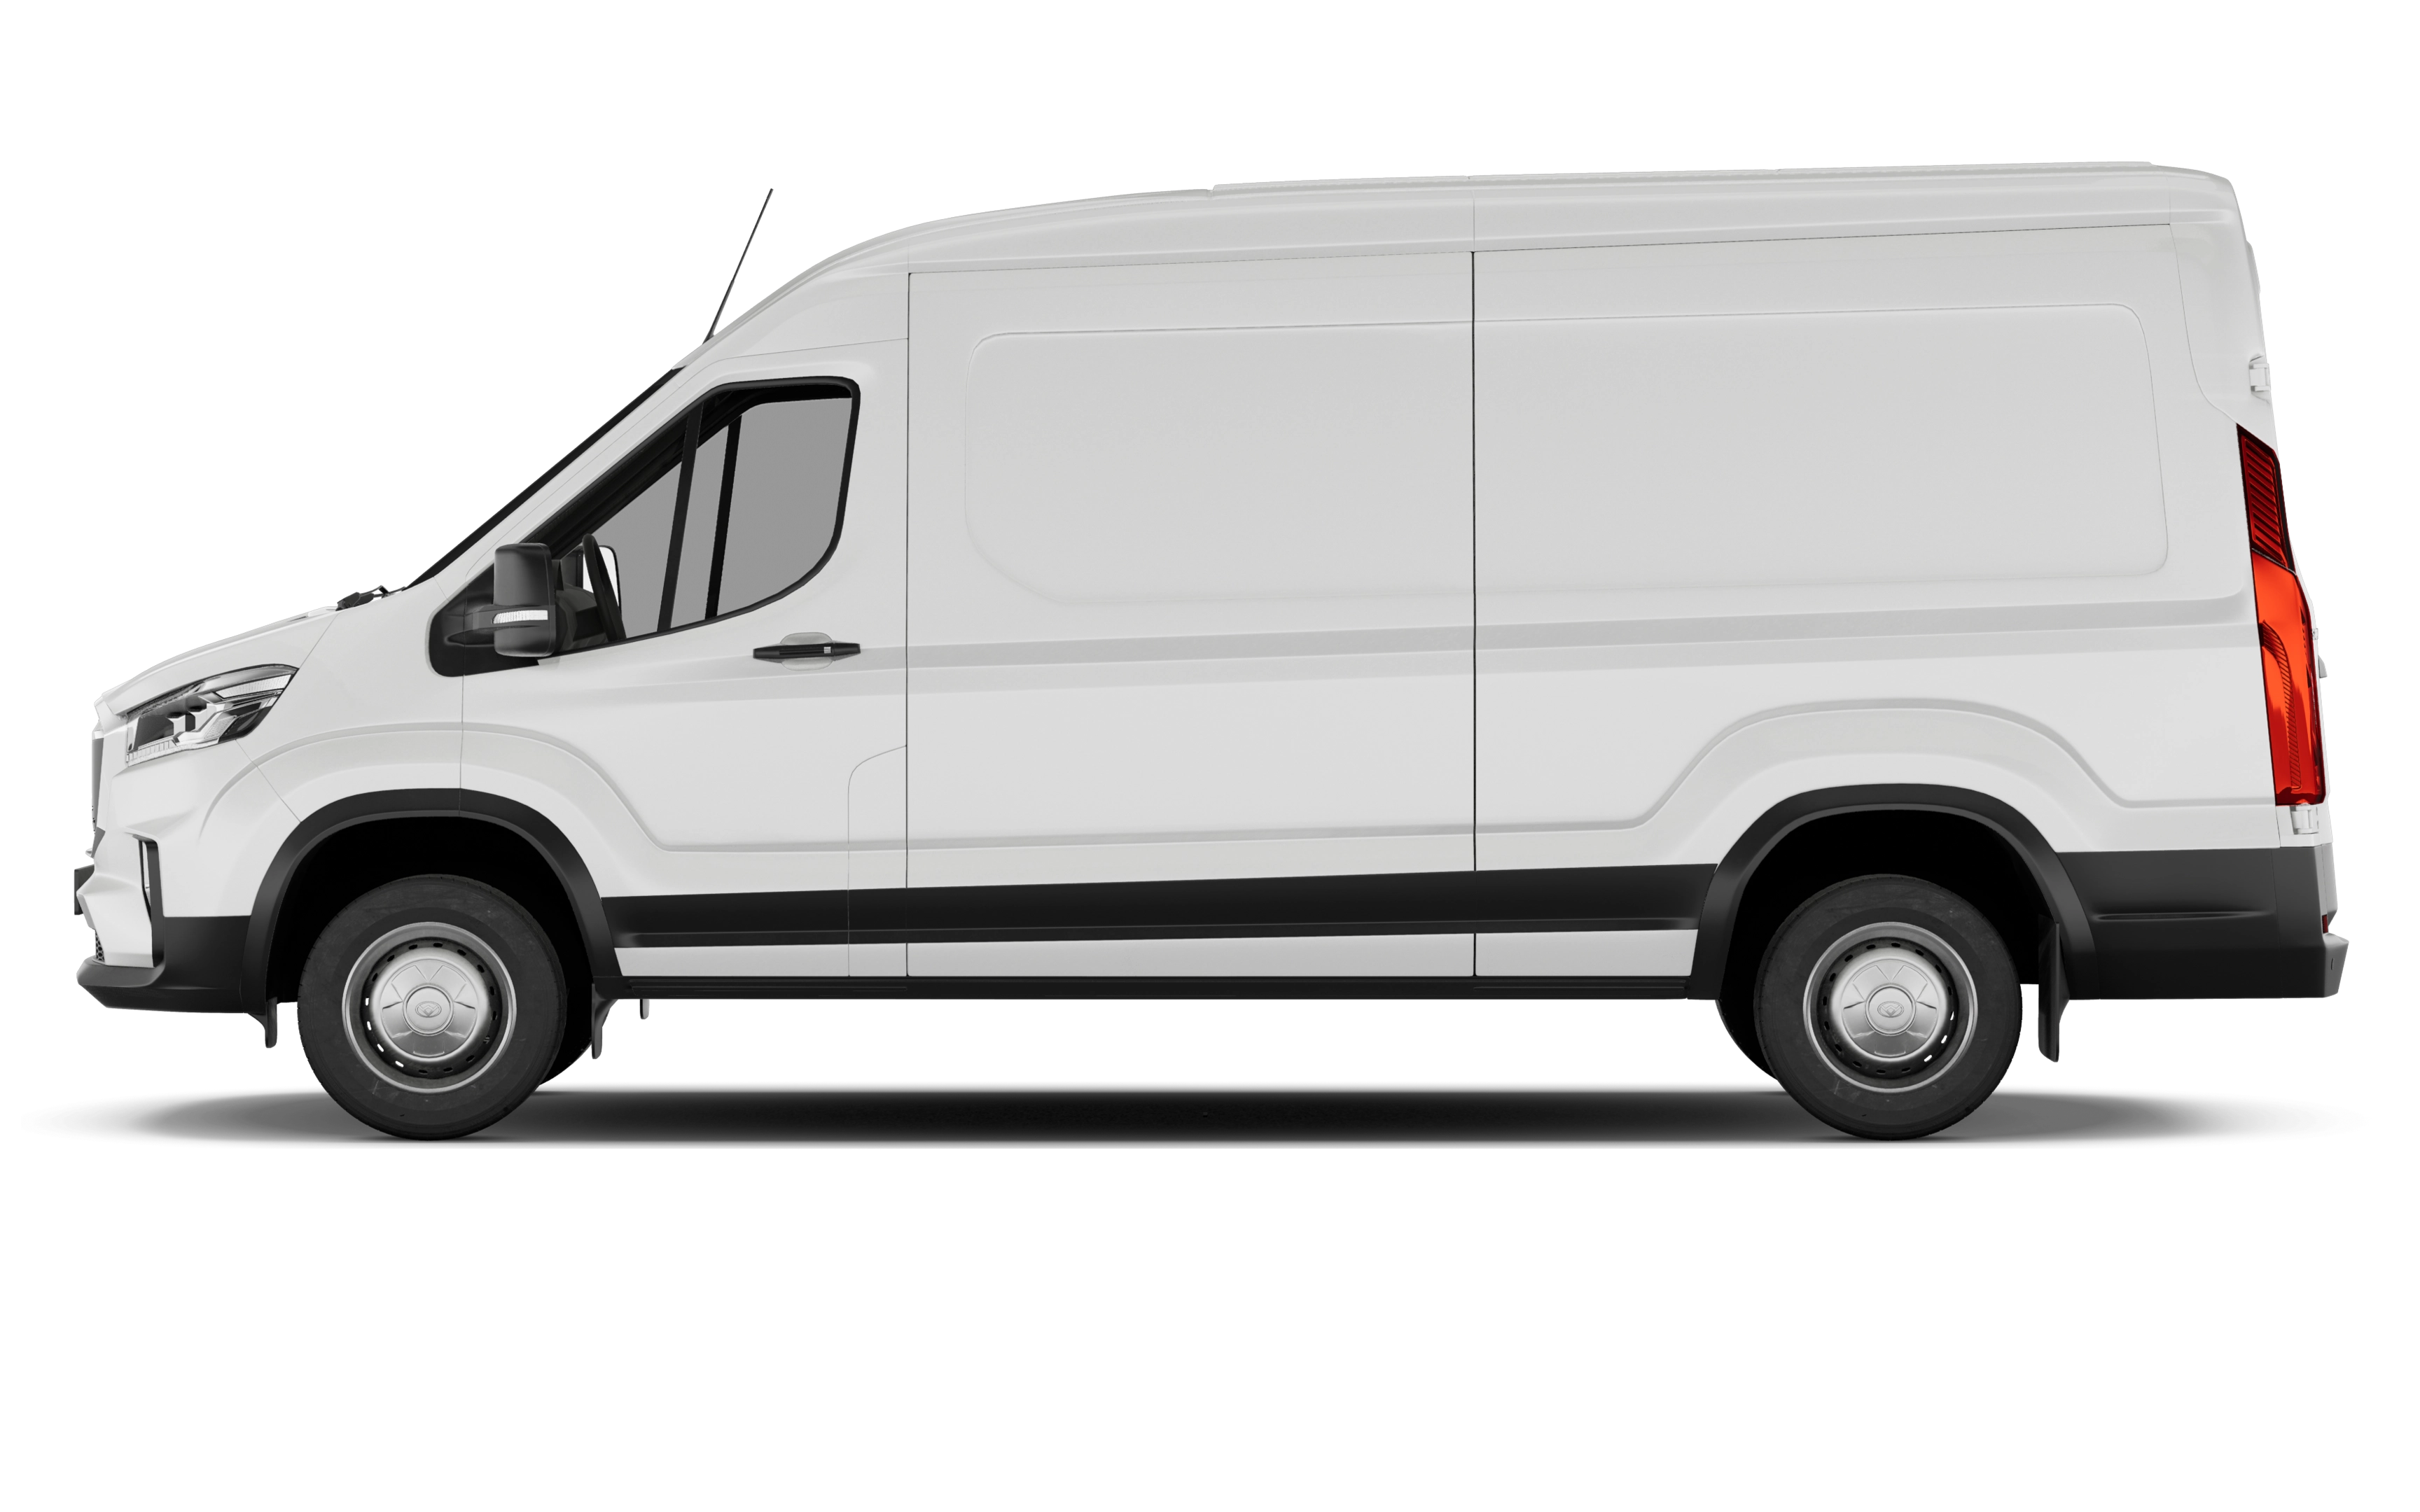 Maxus e deliver 9 lwb electric fwd 150kw high roof van 88.5kwh auto